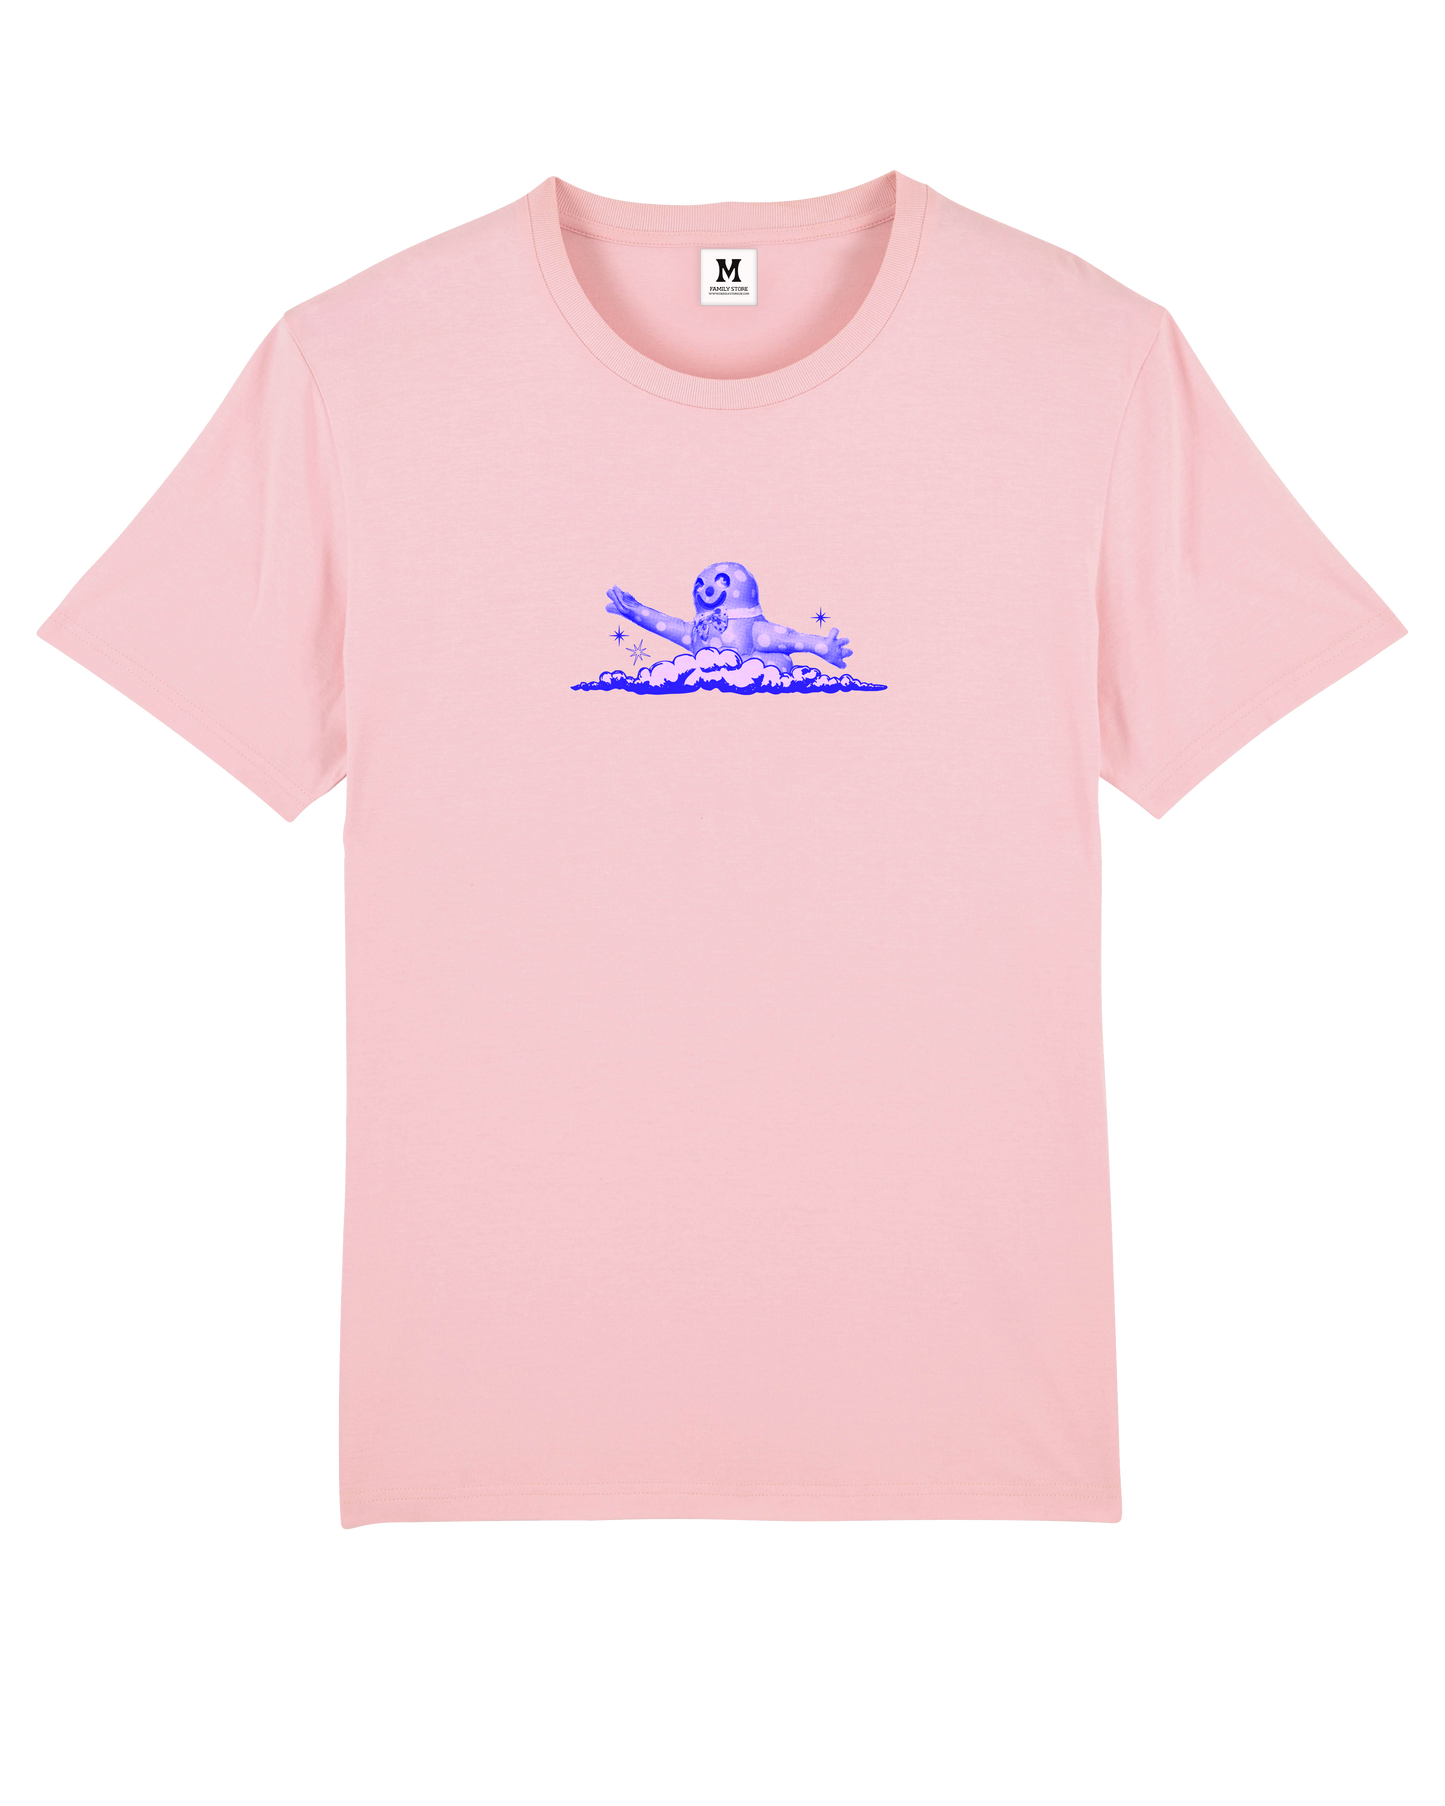 PRE-ORDER Blobby Pink Tee by Family Store